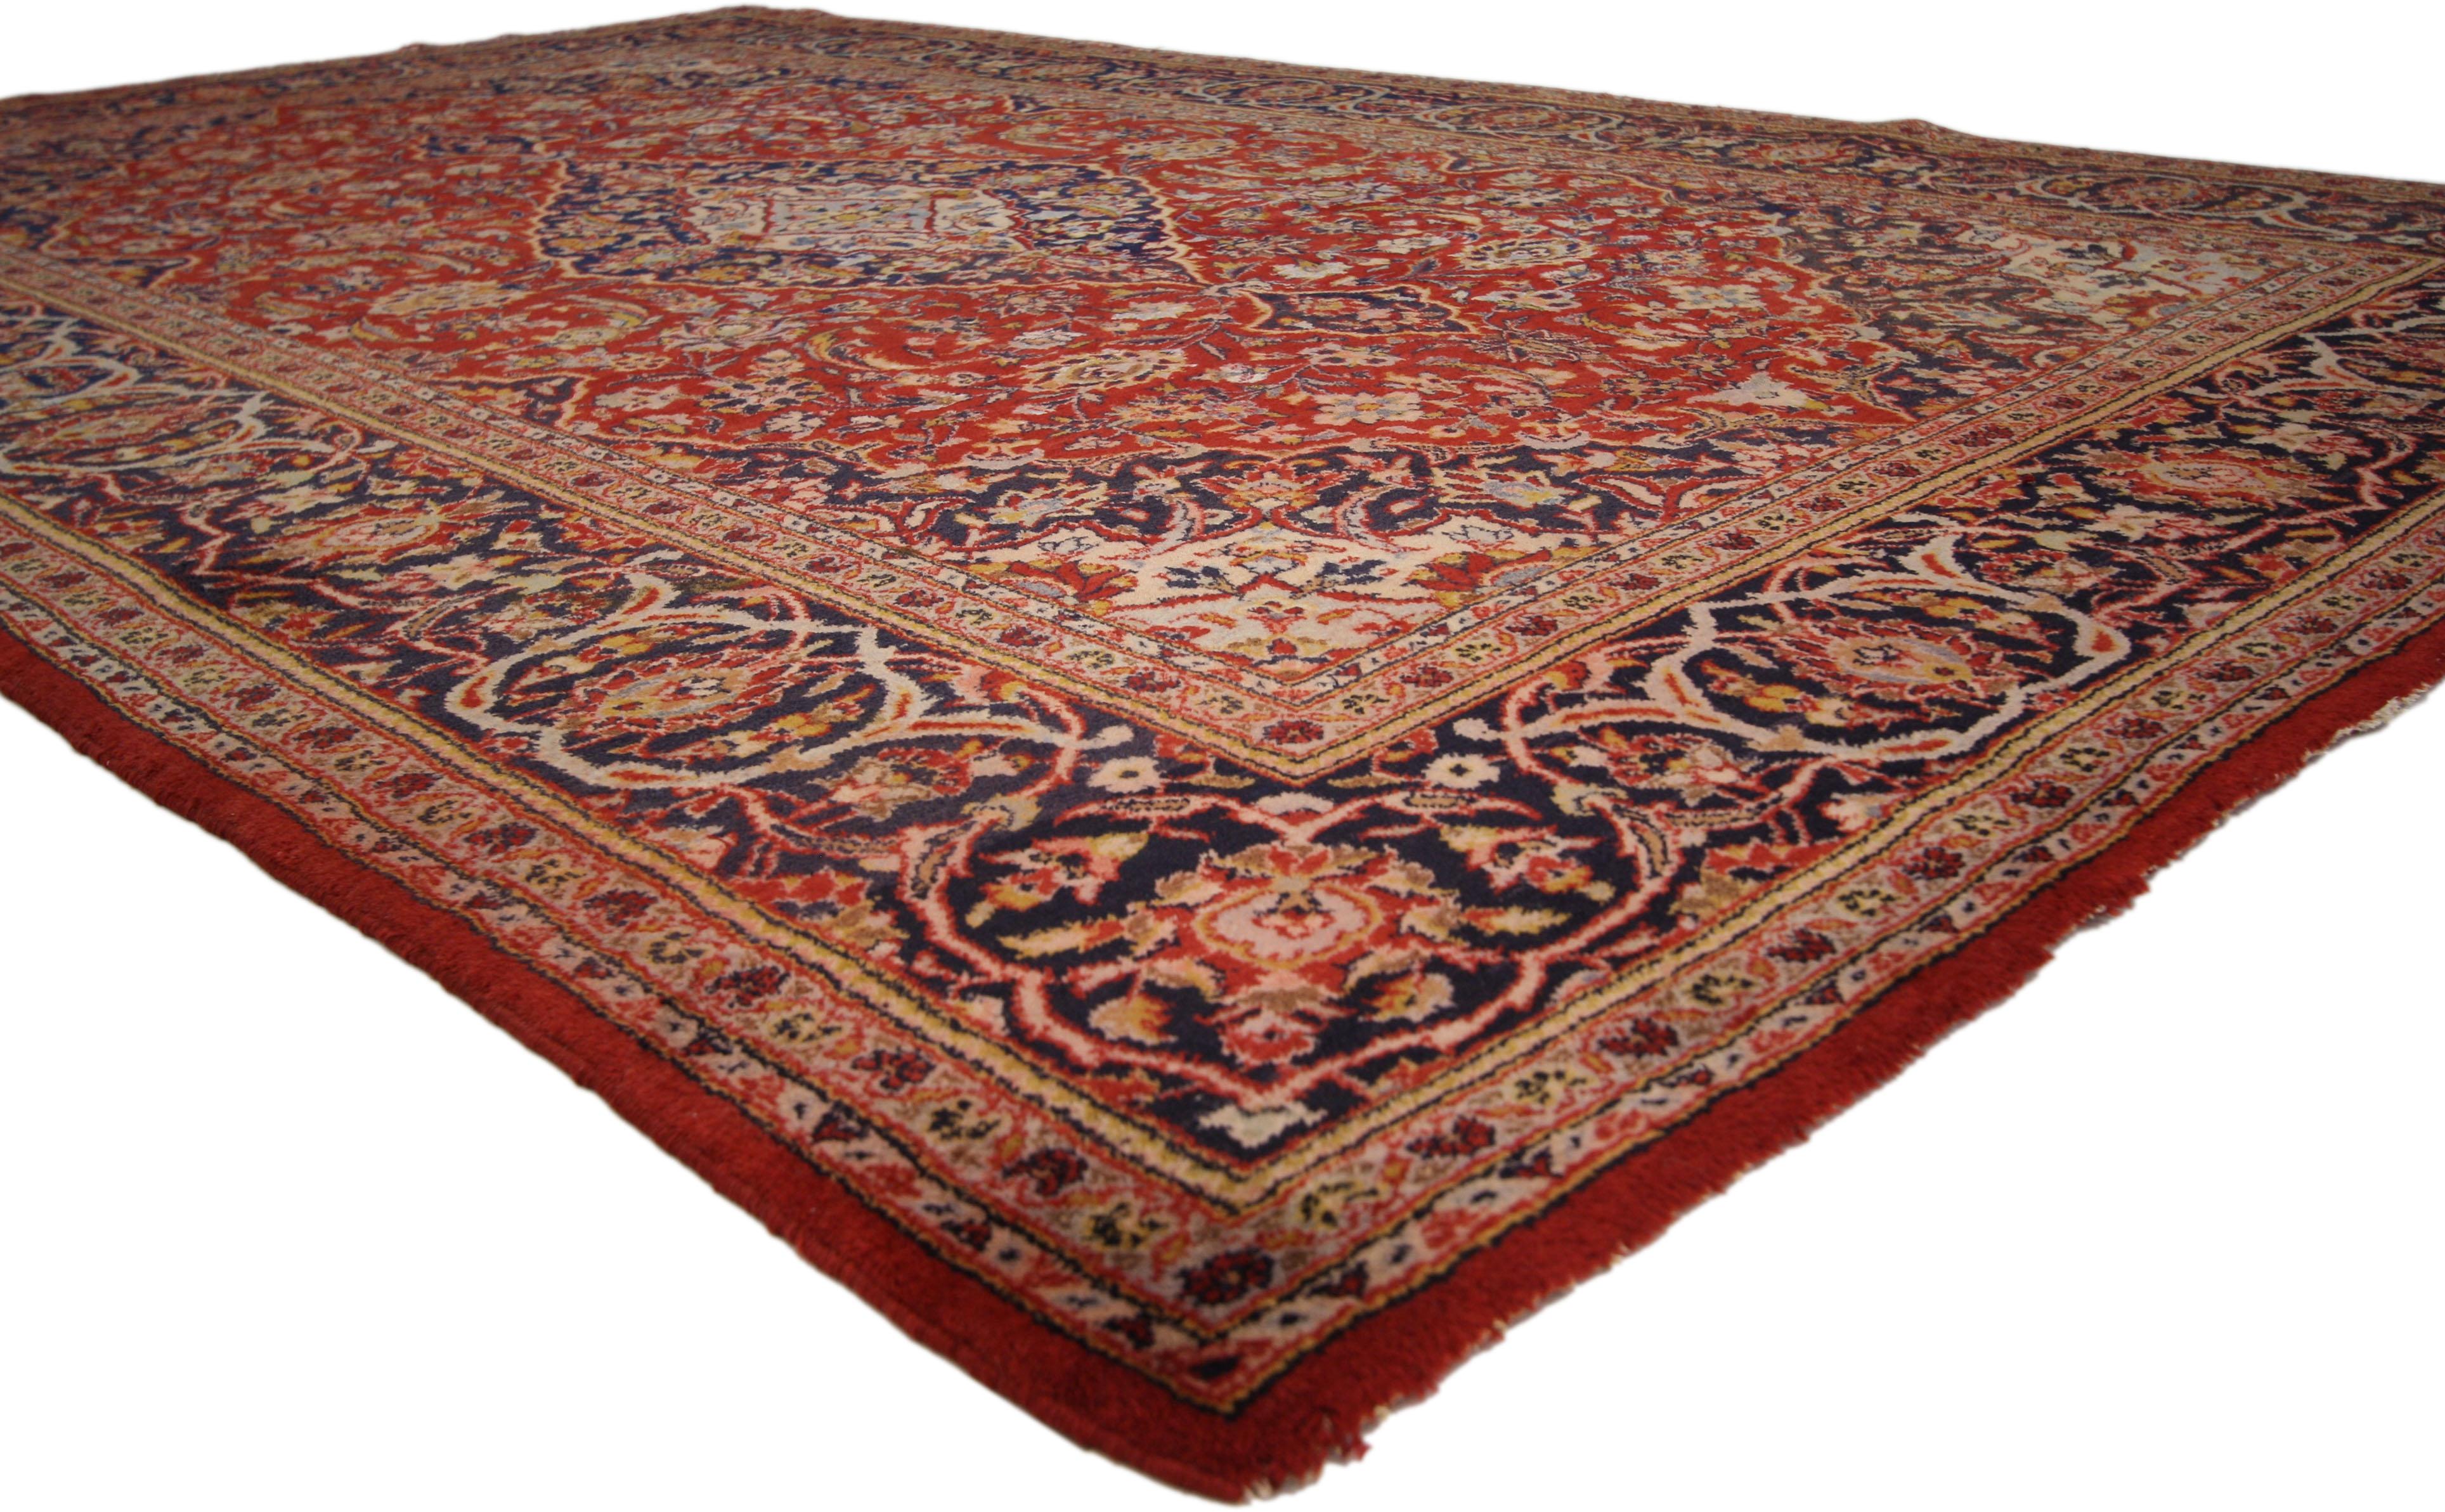 ​71934 Vintage Persian Kashan Rug with Traditional Colonial and Federal Style 06'10 x 10'09. This hand-knotted wool vintage Persian Kashan rug features an almond shaped cusped central medallion anchored with trefoil and palmette pendants on either